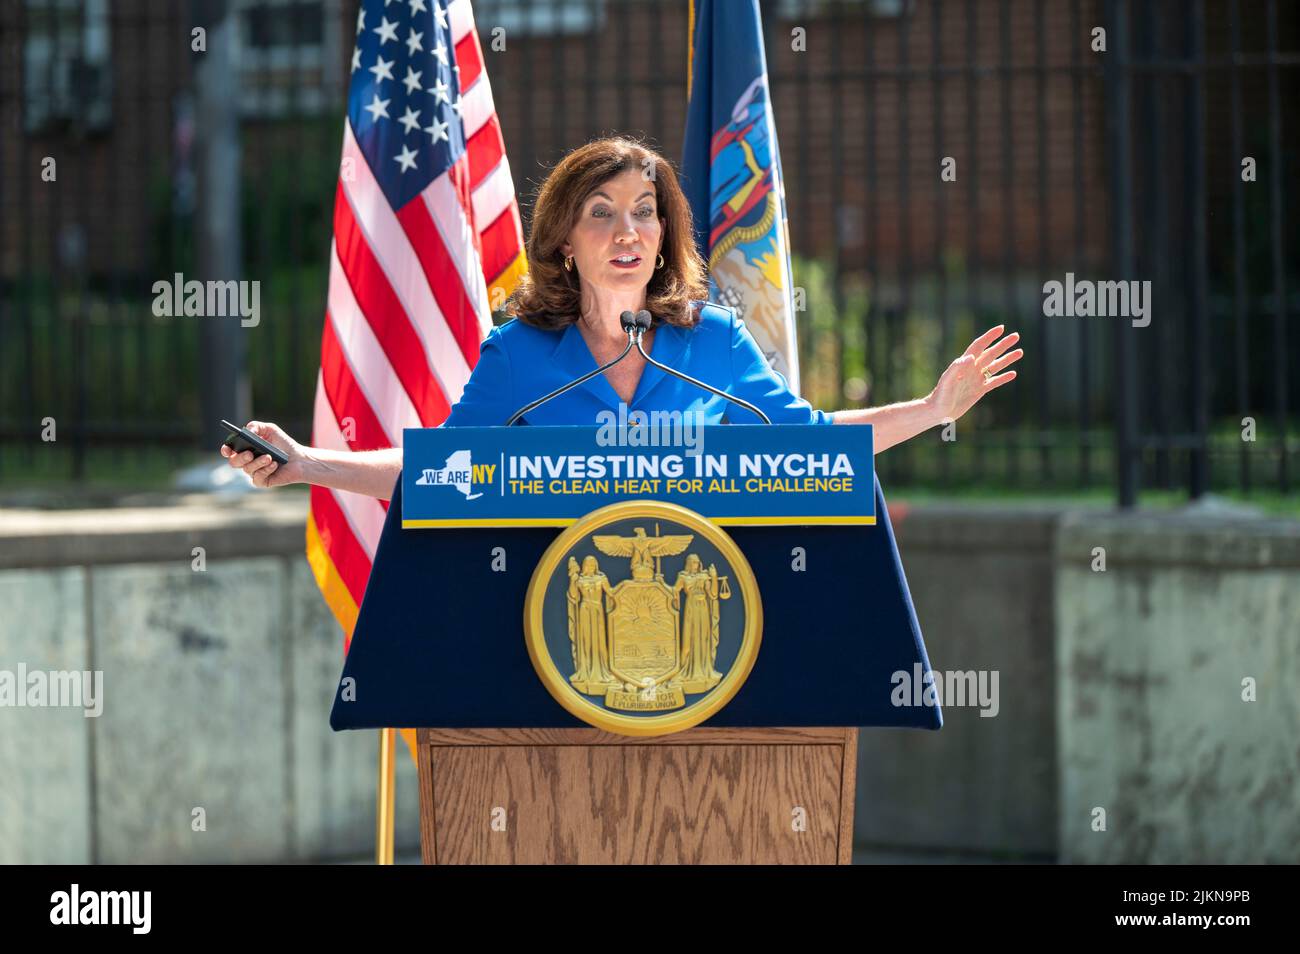 NEW YORK, NEW YORK - AUGUST 02: Governor Kathy Hochul speaks during a joint housing and clean energy-related announcement at Woodside Houses NYCHA complex on August 2, 2022, in Queens Borough of New York City.   Governor Hochul and Mayor Adams announce $70 million initial investment to decarbonize NYCHA buildings as part of clean heat for all challenge. Credit: Ron Adar/Alamy Live News Stock Photo